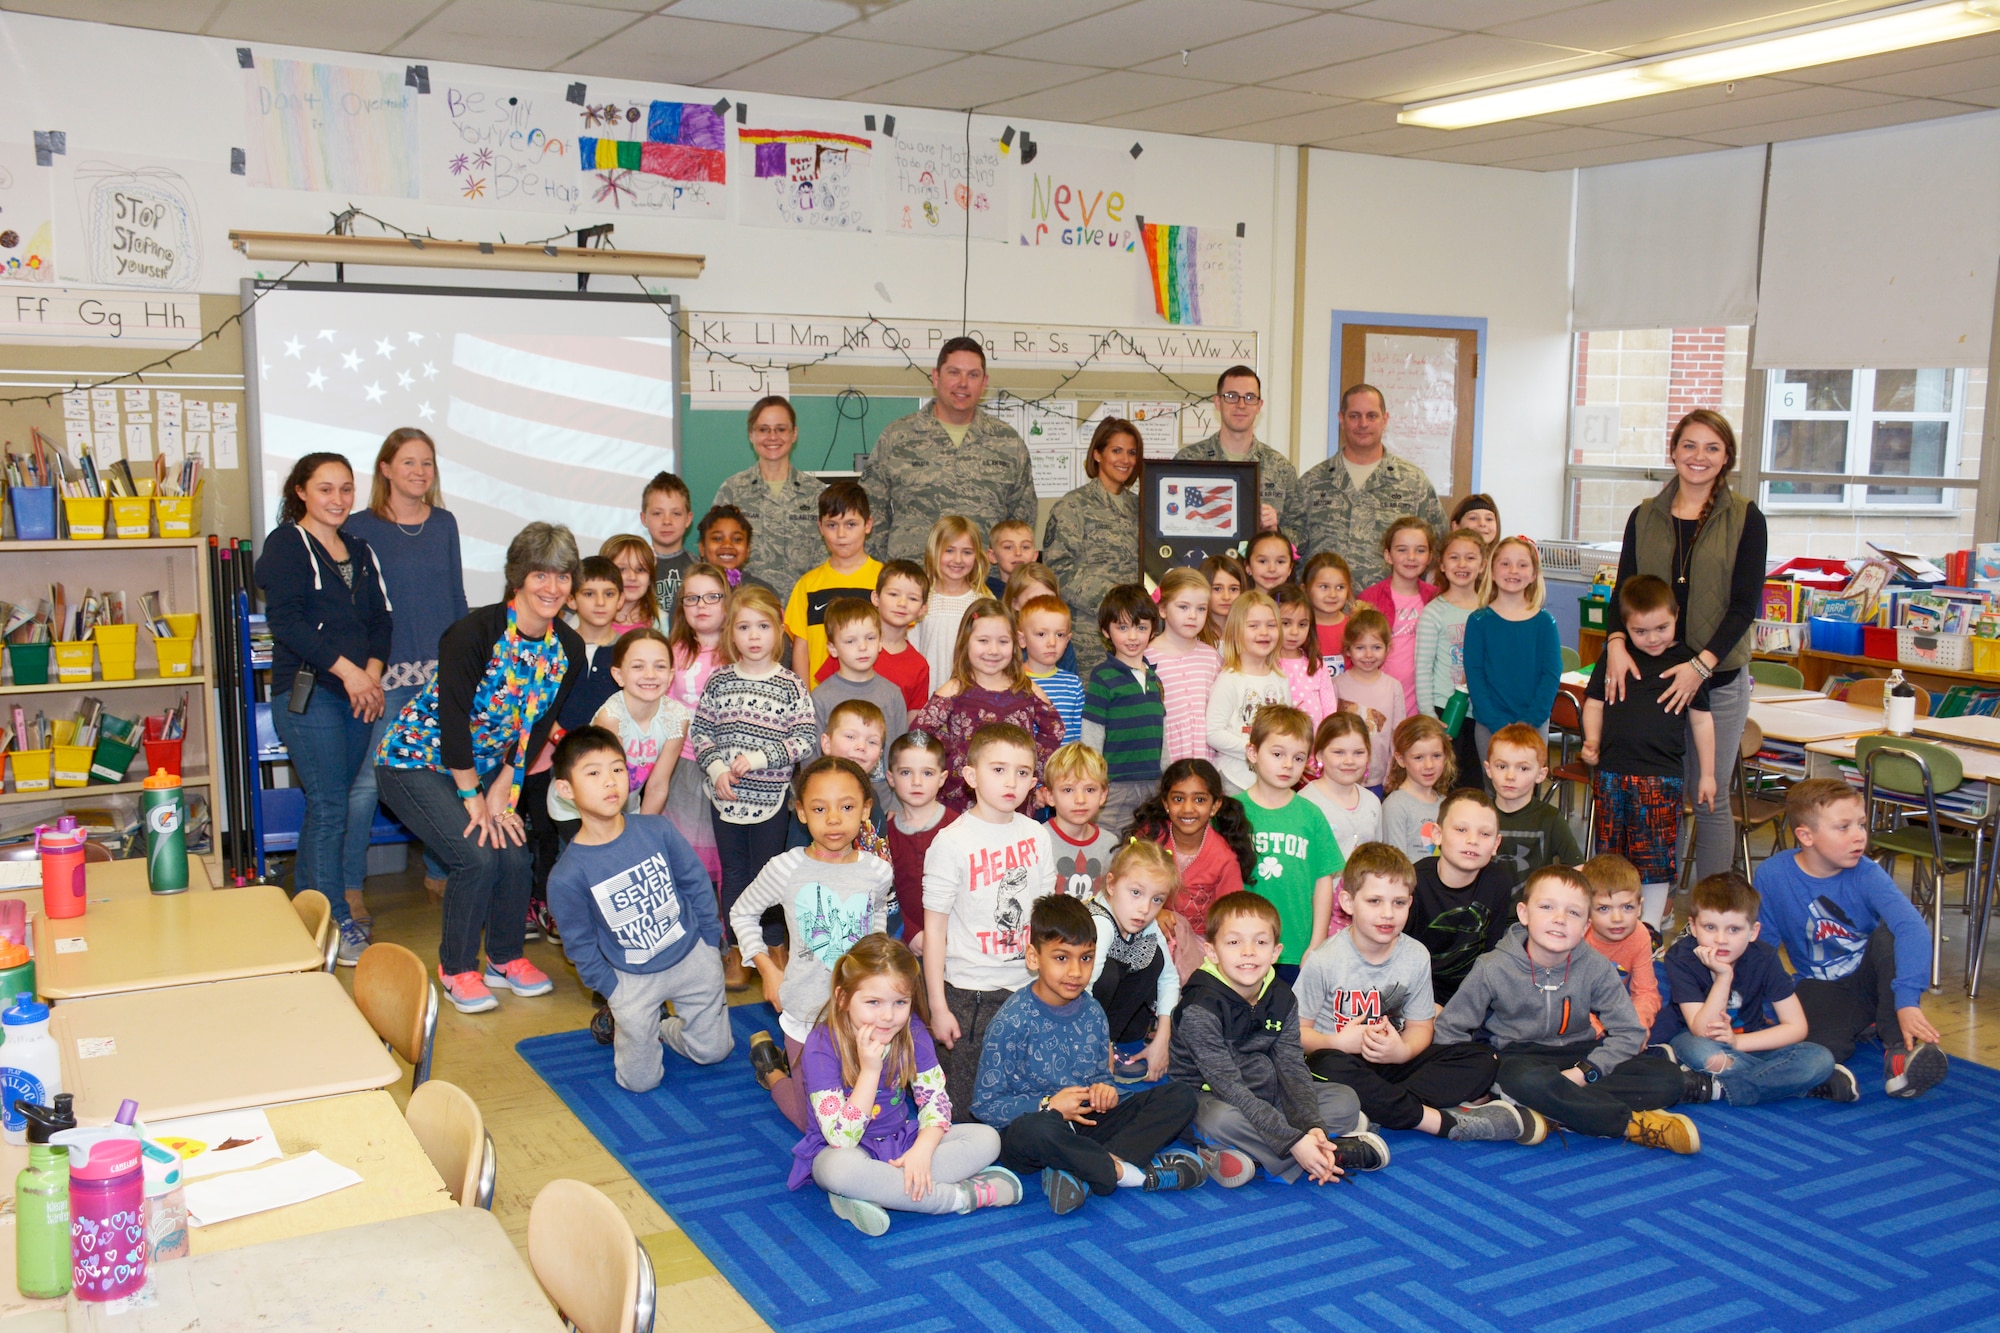 Members of the 157th Civil Engineer Squadron pose with students from the Garrison Elementary School in Dover, N.H. March 30, 2018.  Lt. Col. Eugene R. Mozzoni, 157th CES Commander, presented a flag and certificate to the students during a ceremony thanking the students for sending letters to the engineers while they were deployed to the Middle East. The flag was flown over the country of Kuwait during the last holiday season. (N.H. Air National Guard photo by Master Sgt. Thomas Johnson)